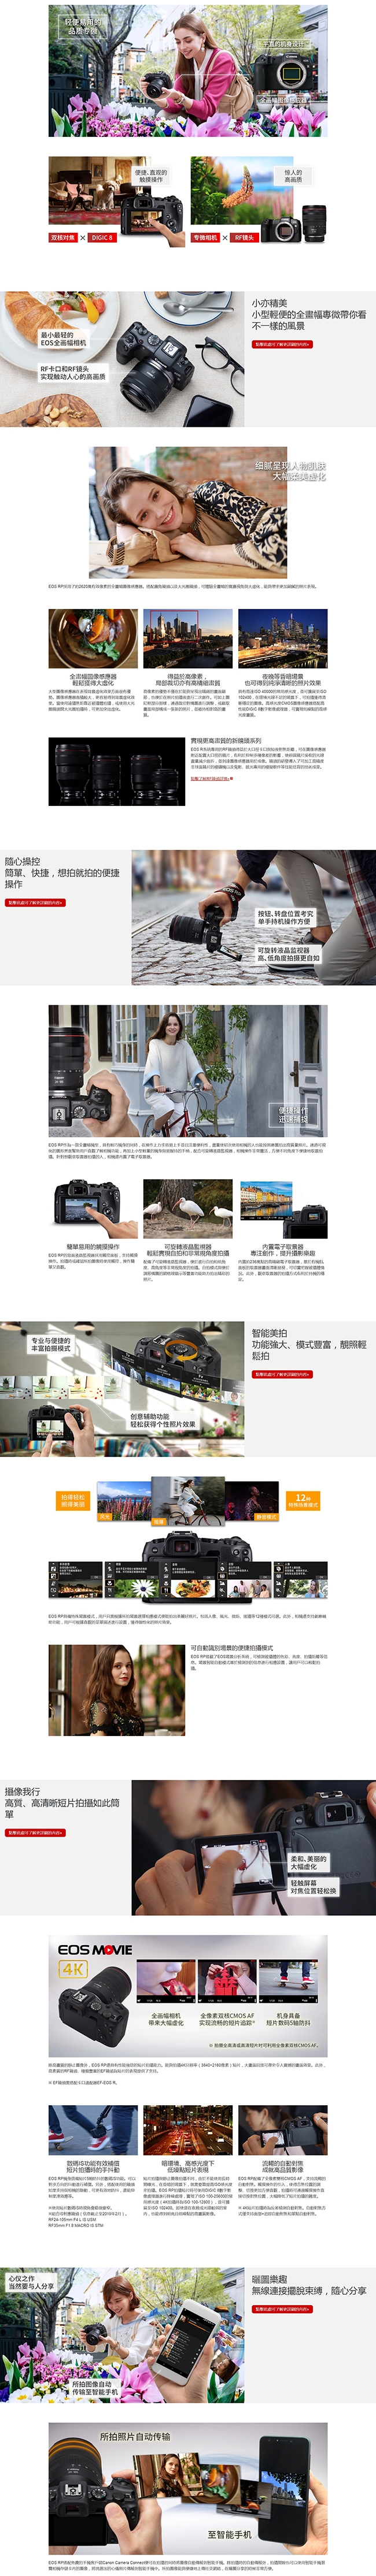 Canon EOS RP + RF24-105mm f/4L IS USM(中文平輸)